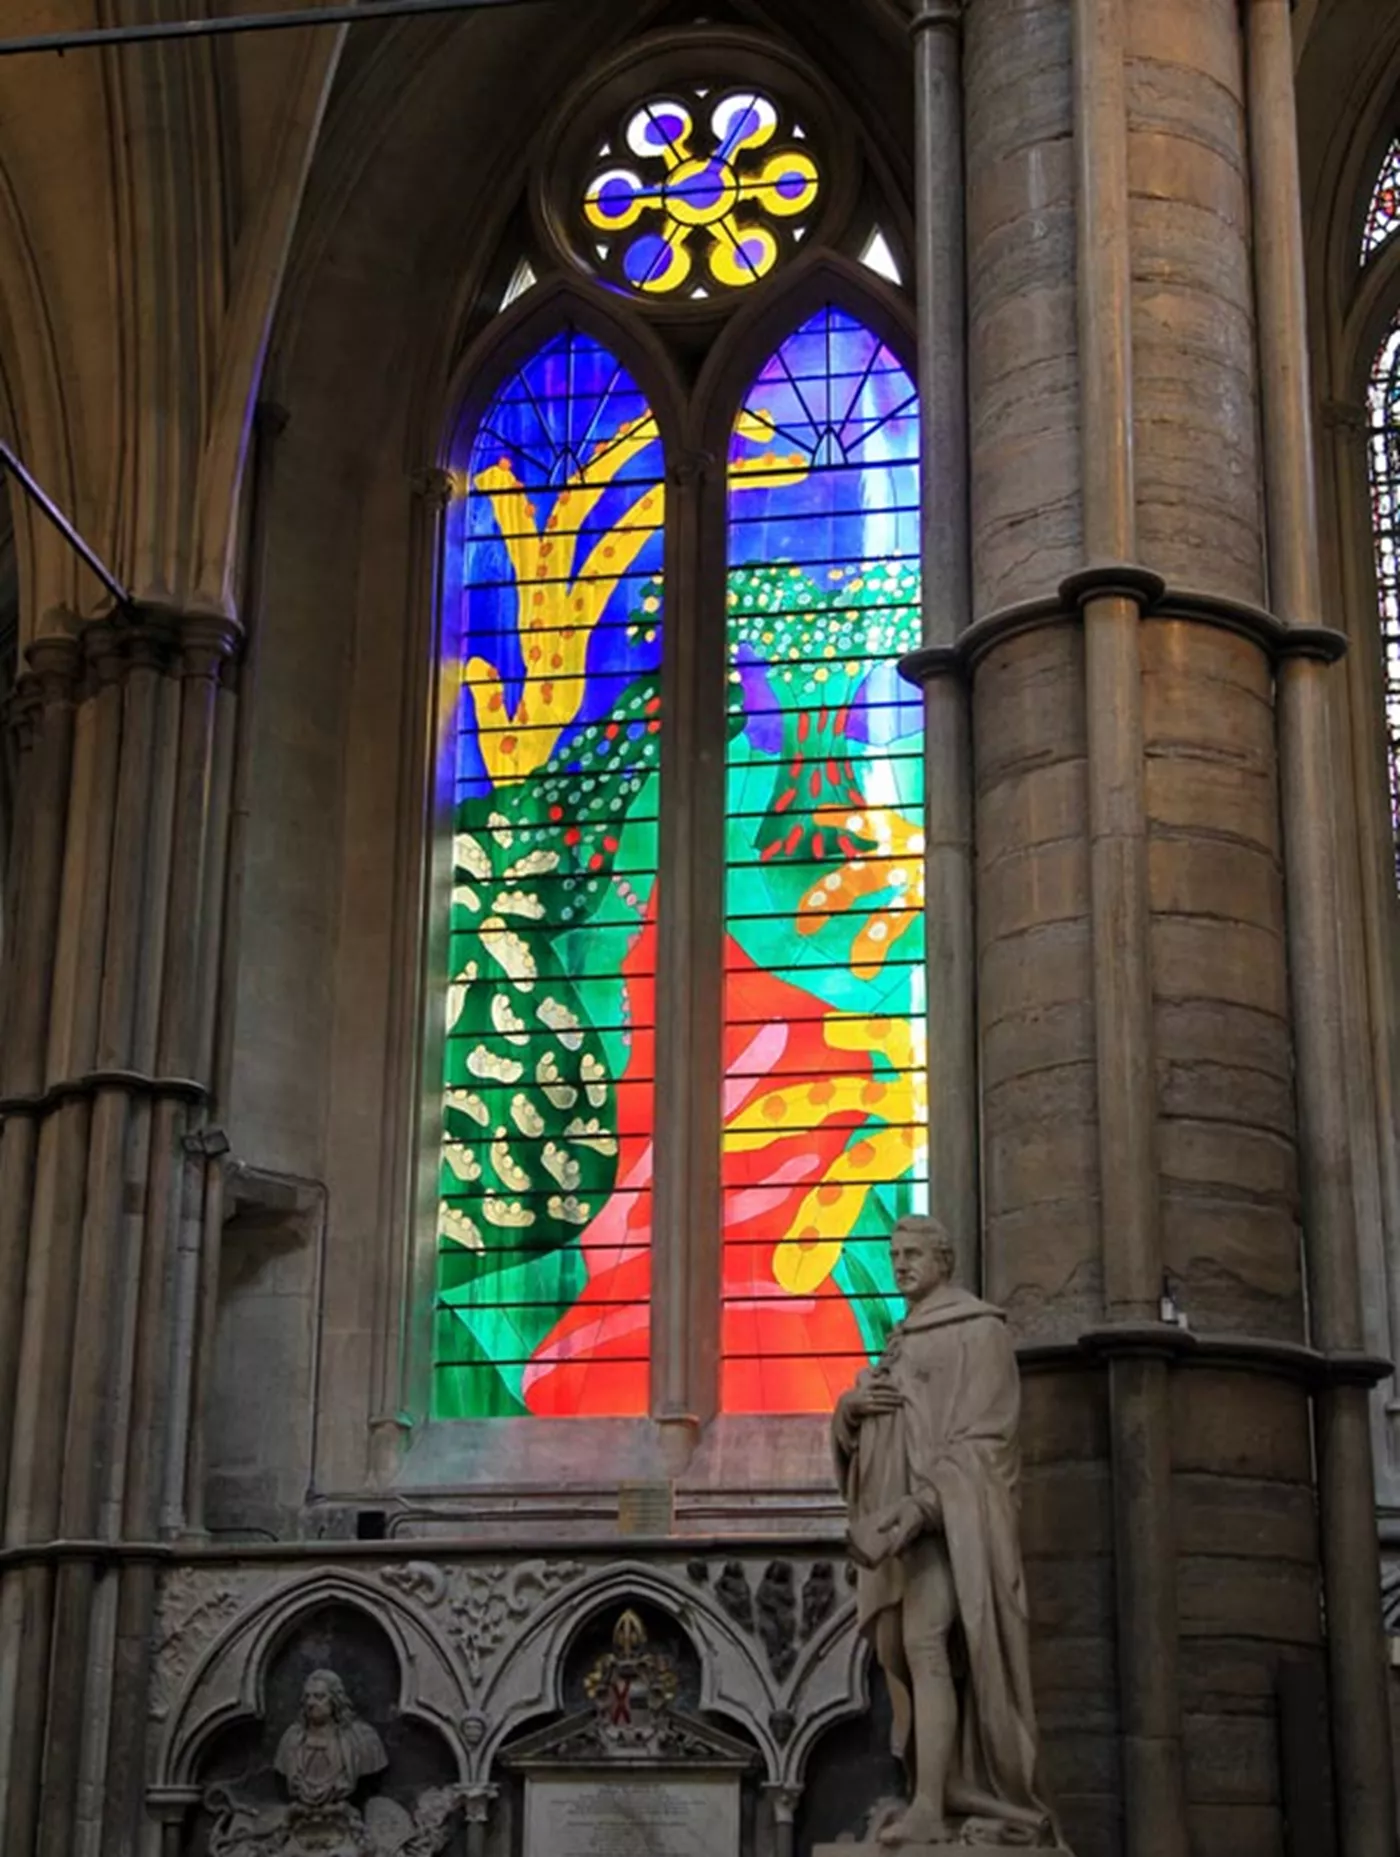 The Queen's Window by David Hockney in Westminster Abbey | Article on ArtWizard